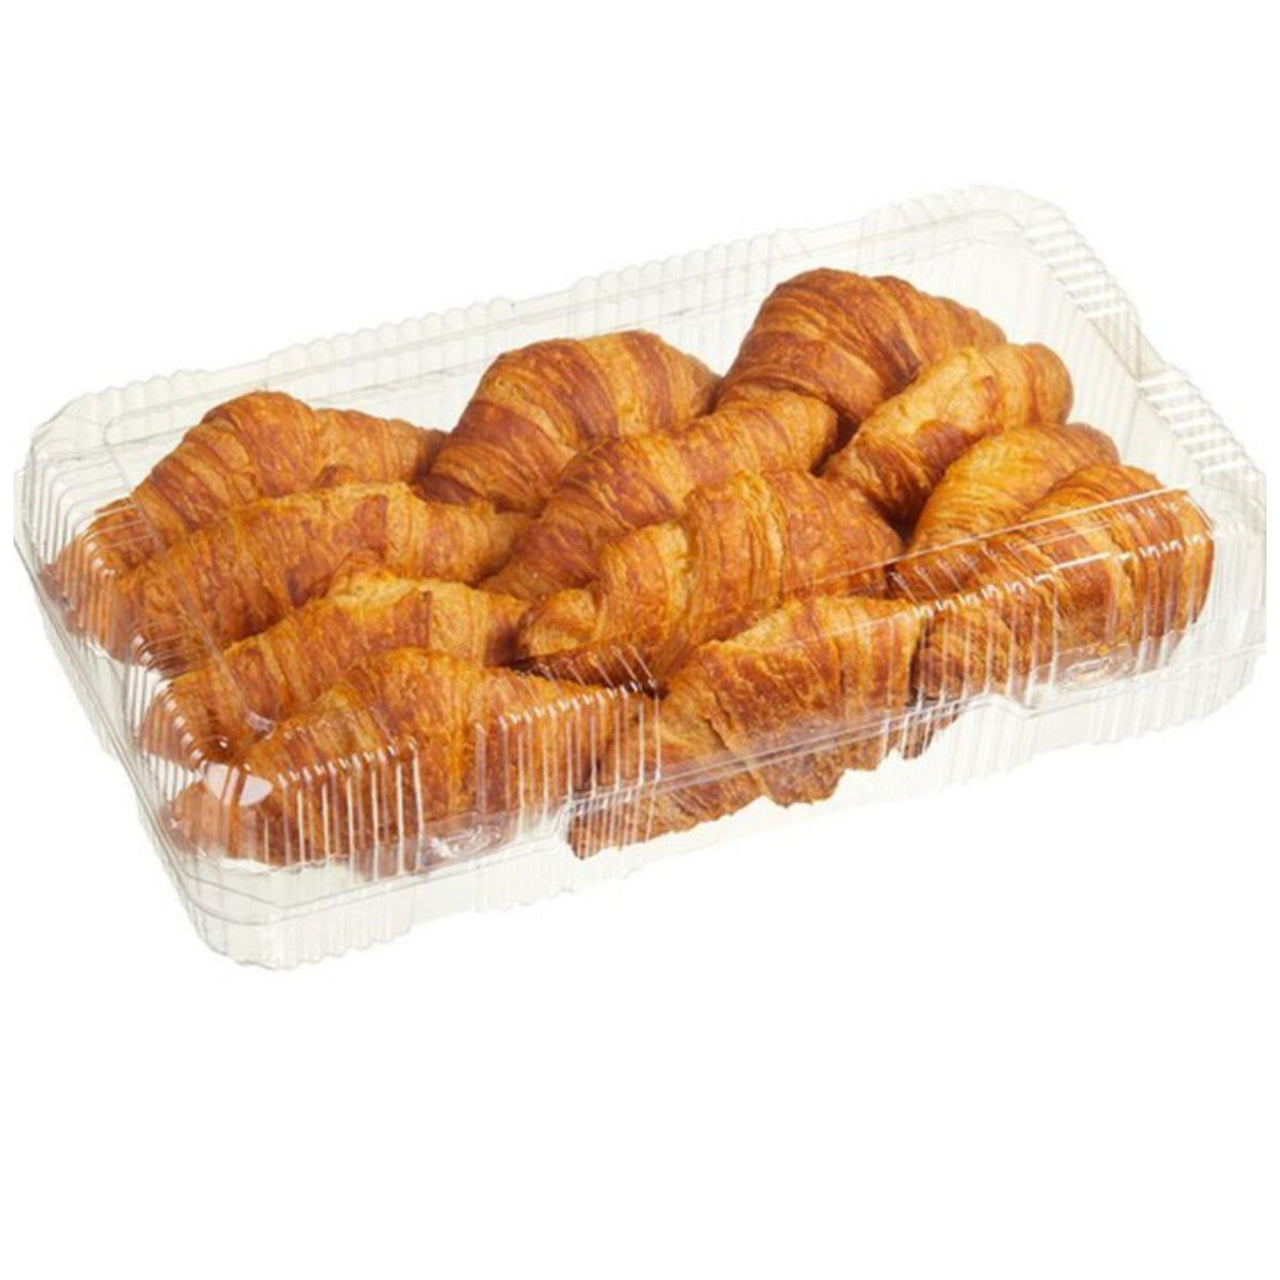 Image of Bakery All Butter Croissants - 1 x 825 Grams